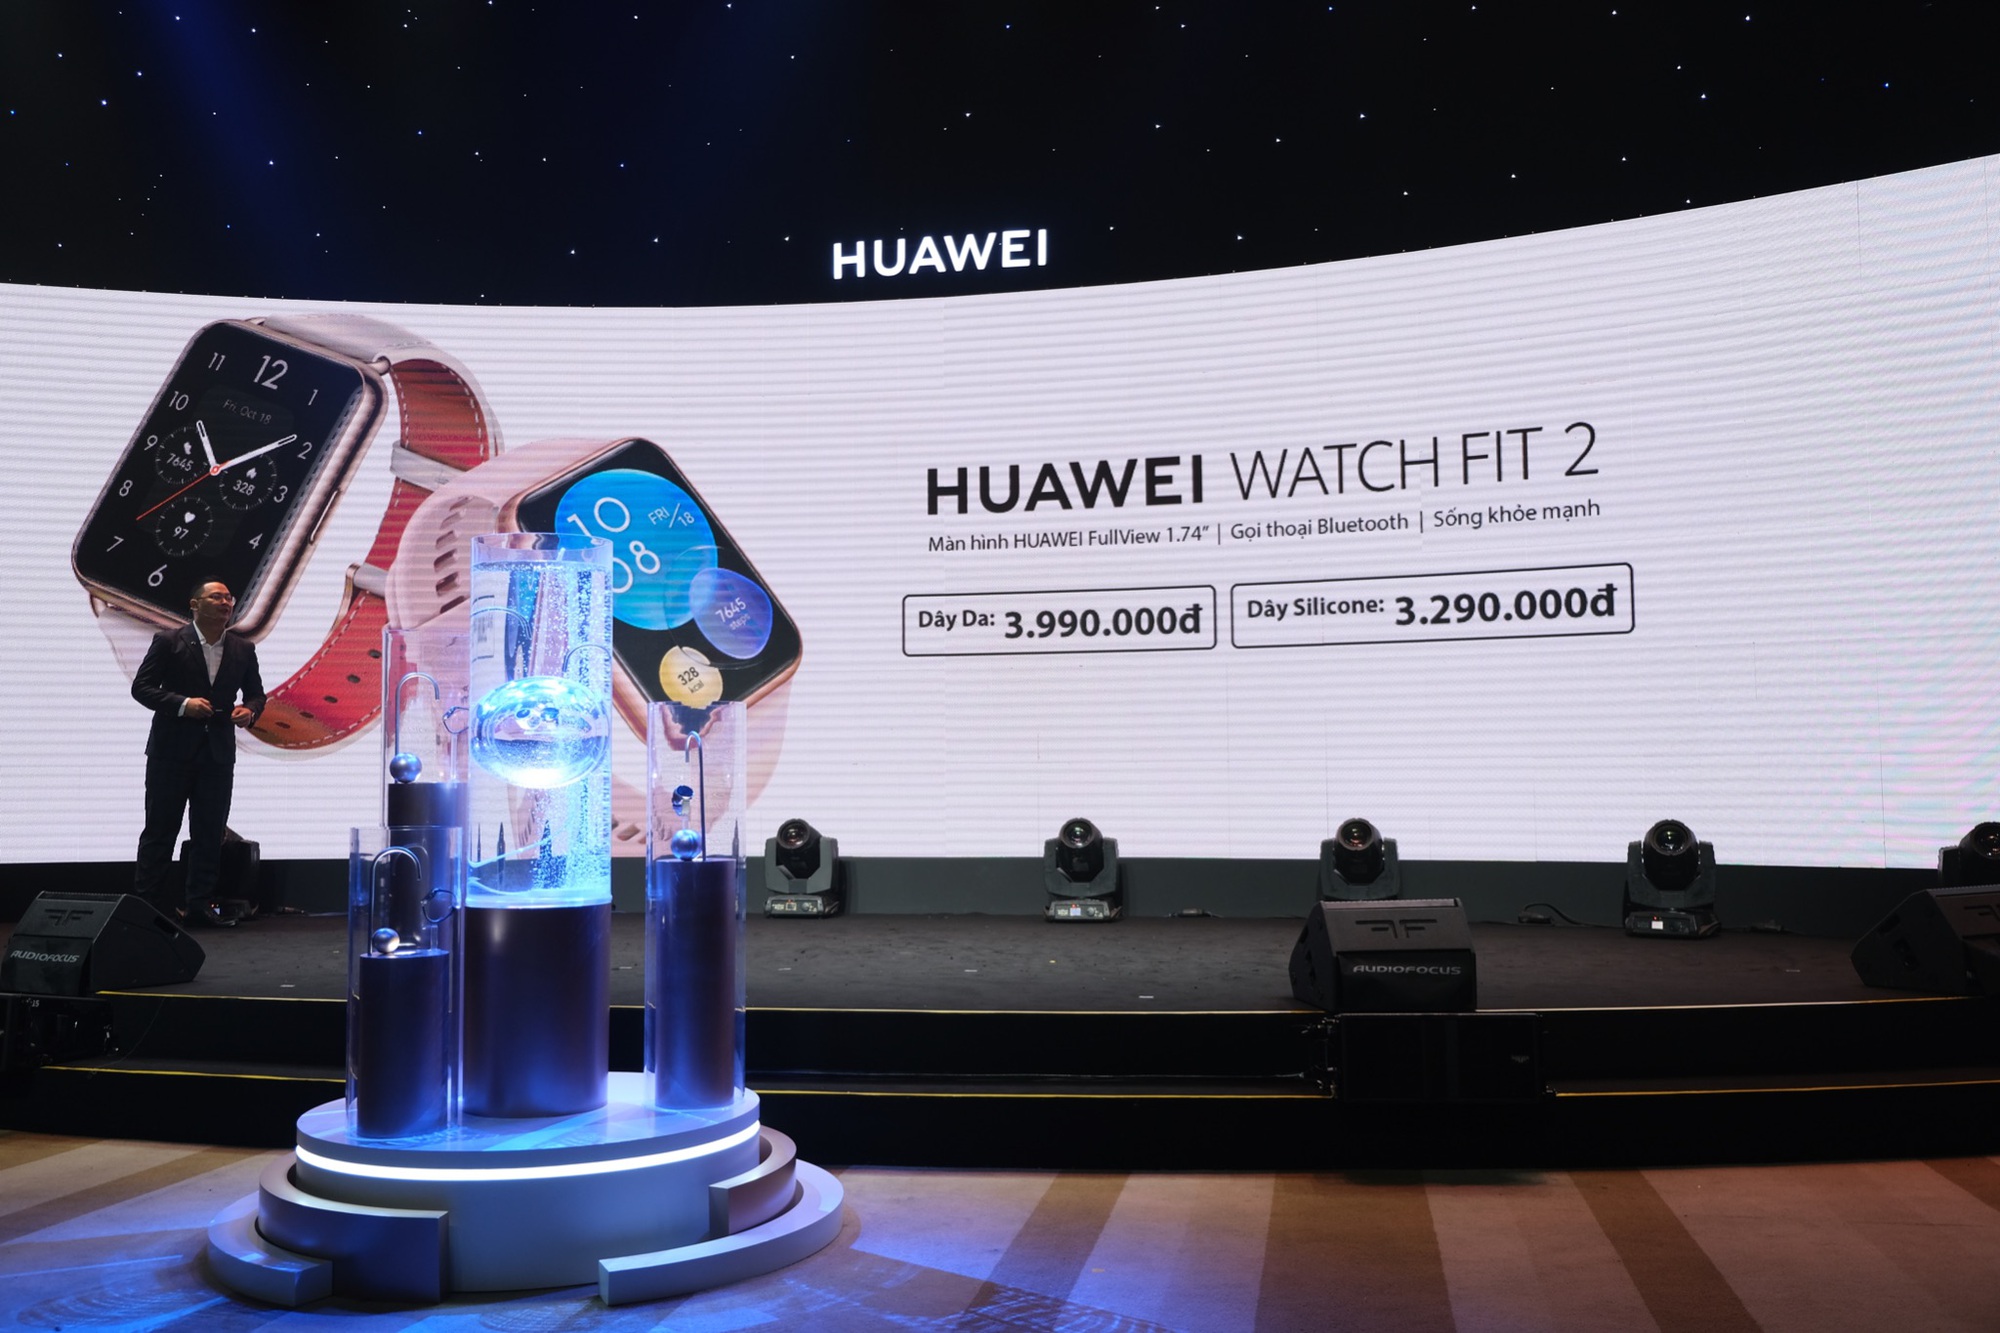 Bao Anh, Trong Hieu shined at the launch event of 3 new Huawei smartwatch models - Photo 6.